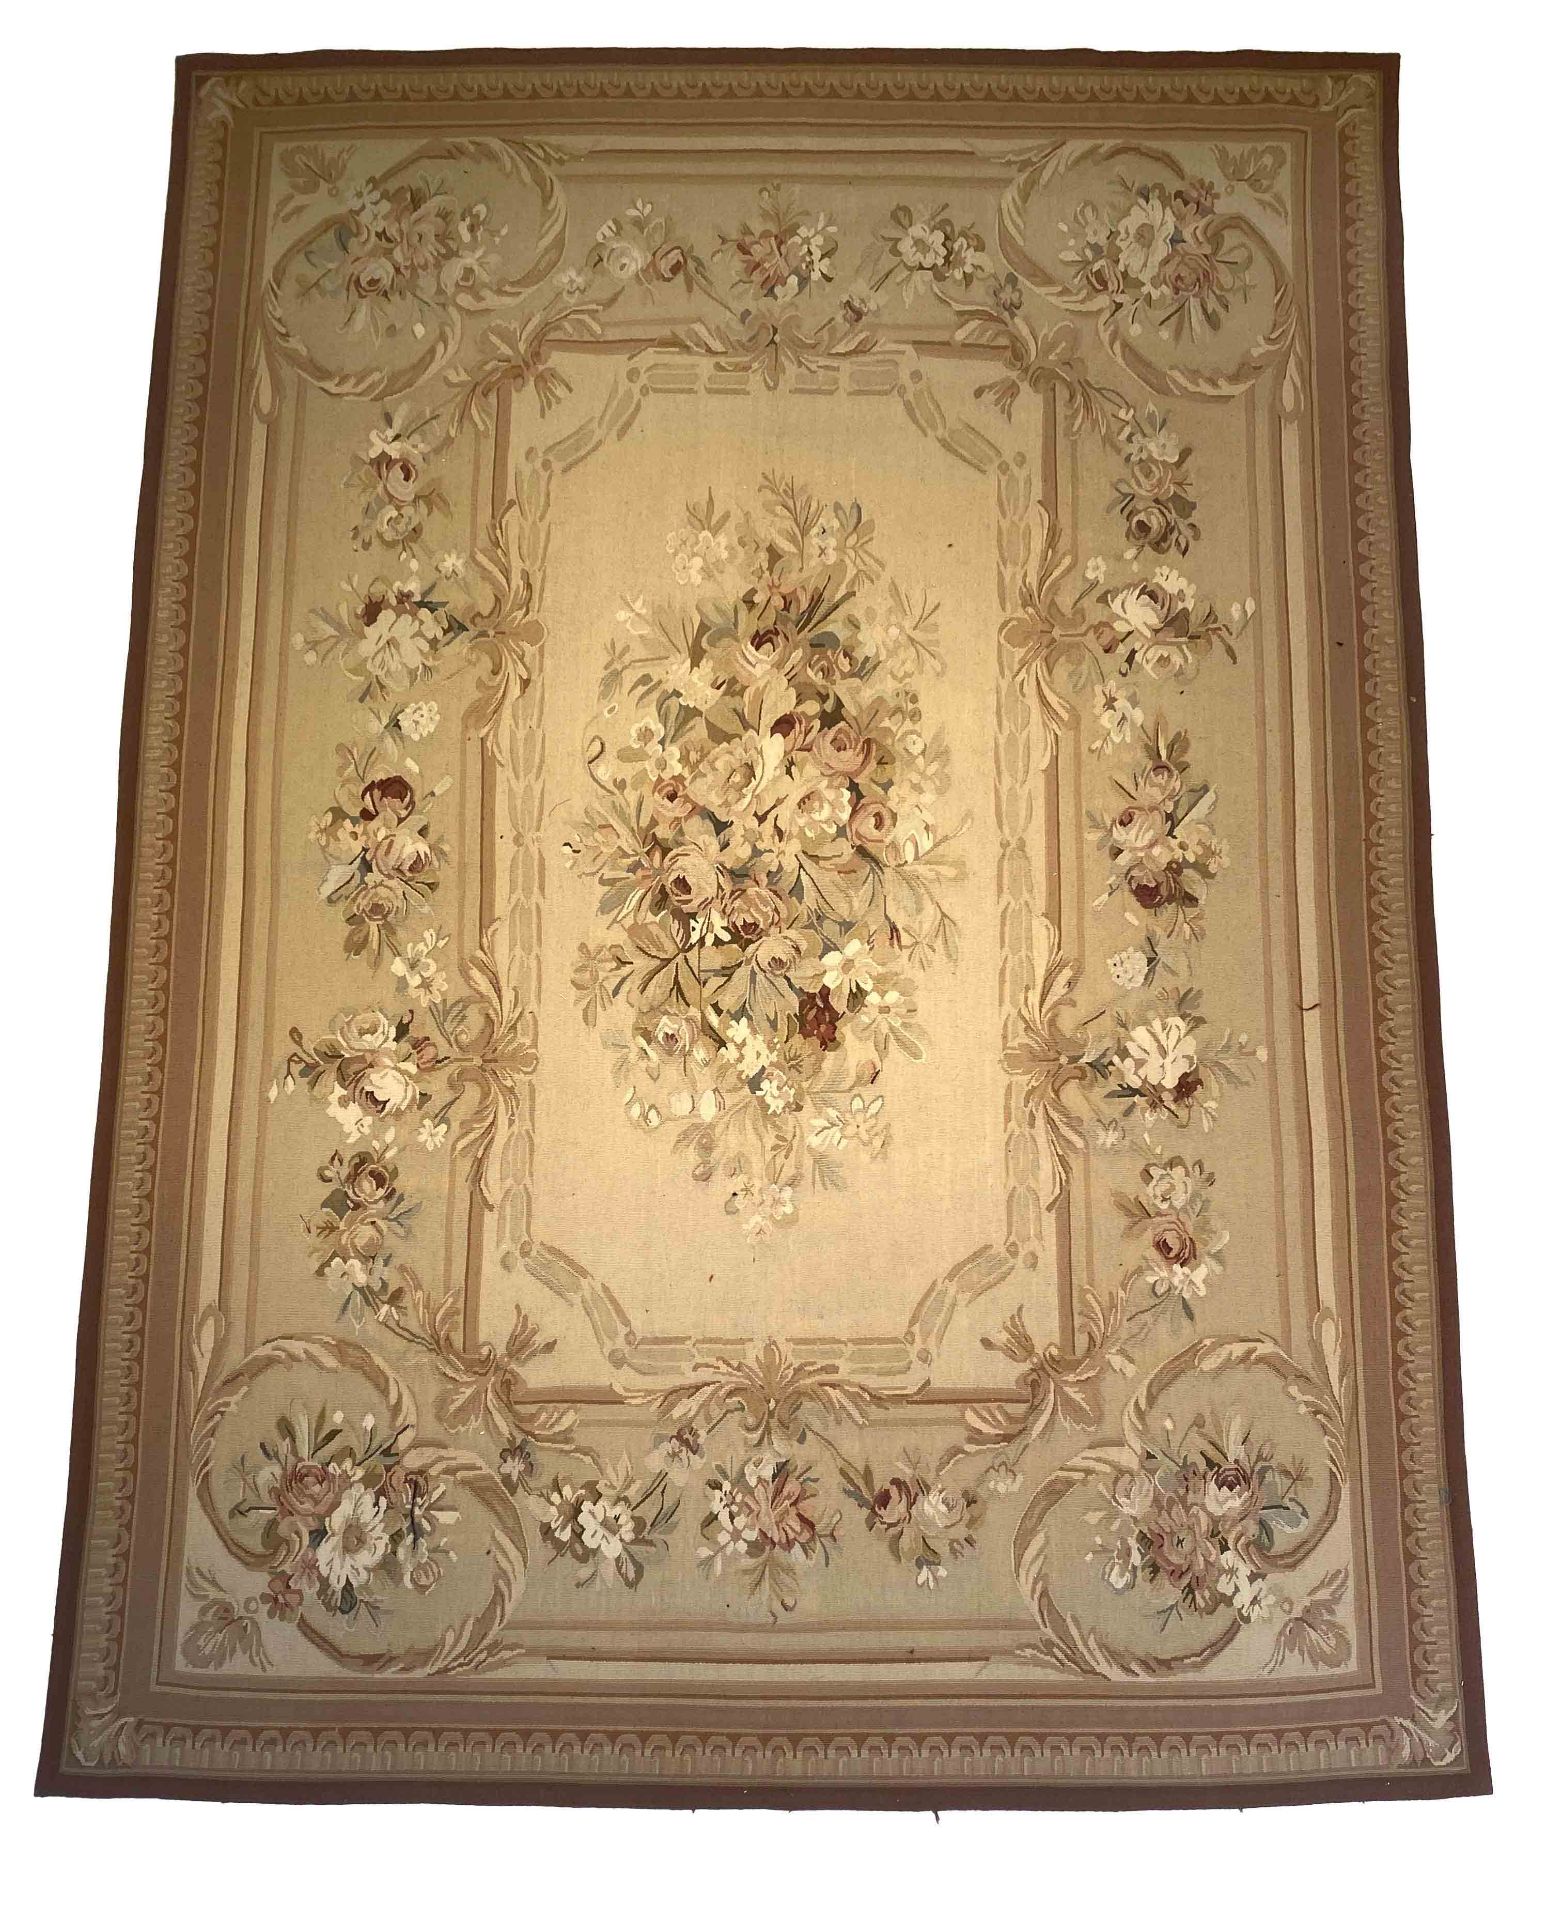 Carpet, Aubusson, good condition with minor wear, 274 x 183 cm - The carpet can only be viewed and